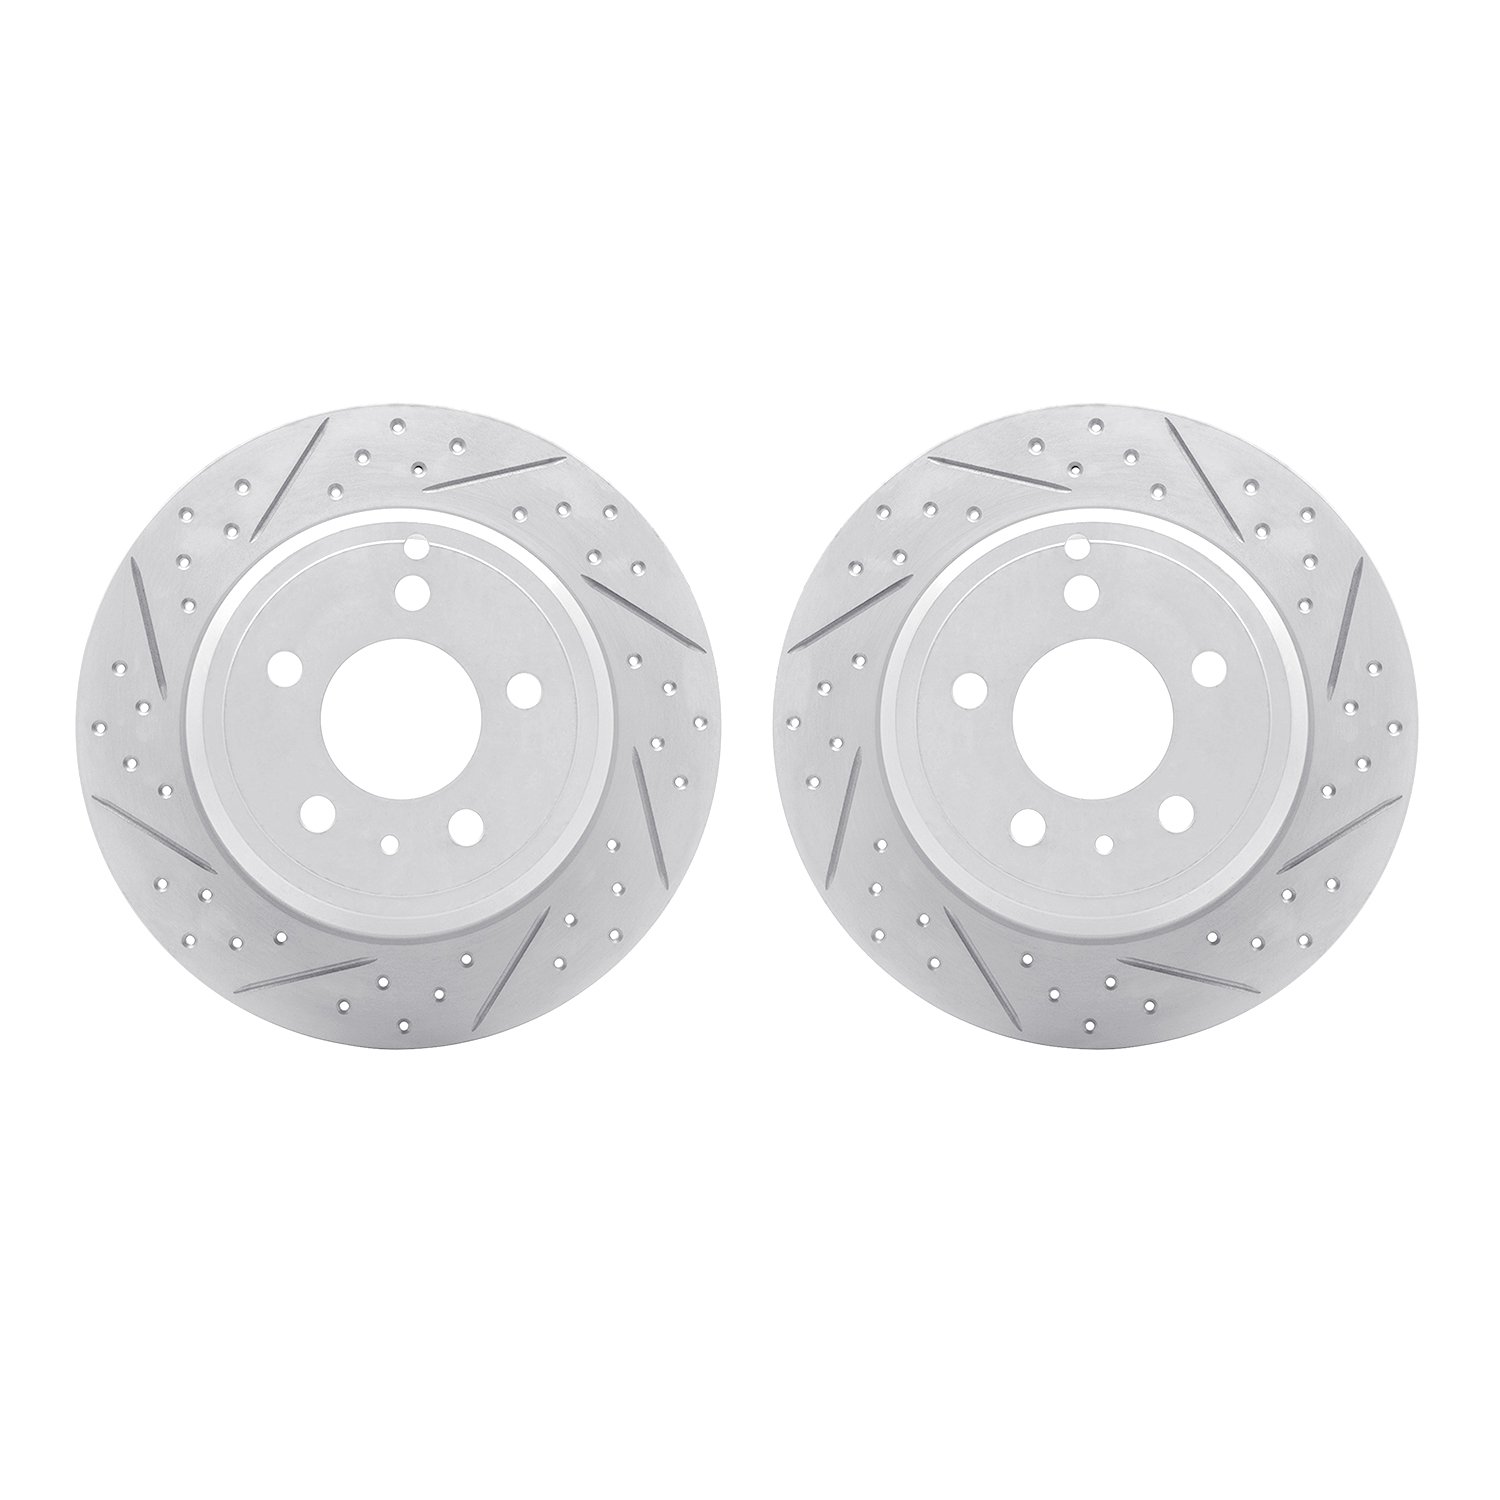 2002-27023 Geoperformance Drilled/Slotted Brake Rotors, 1996-2004 Volvo, Position: Rear